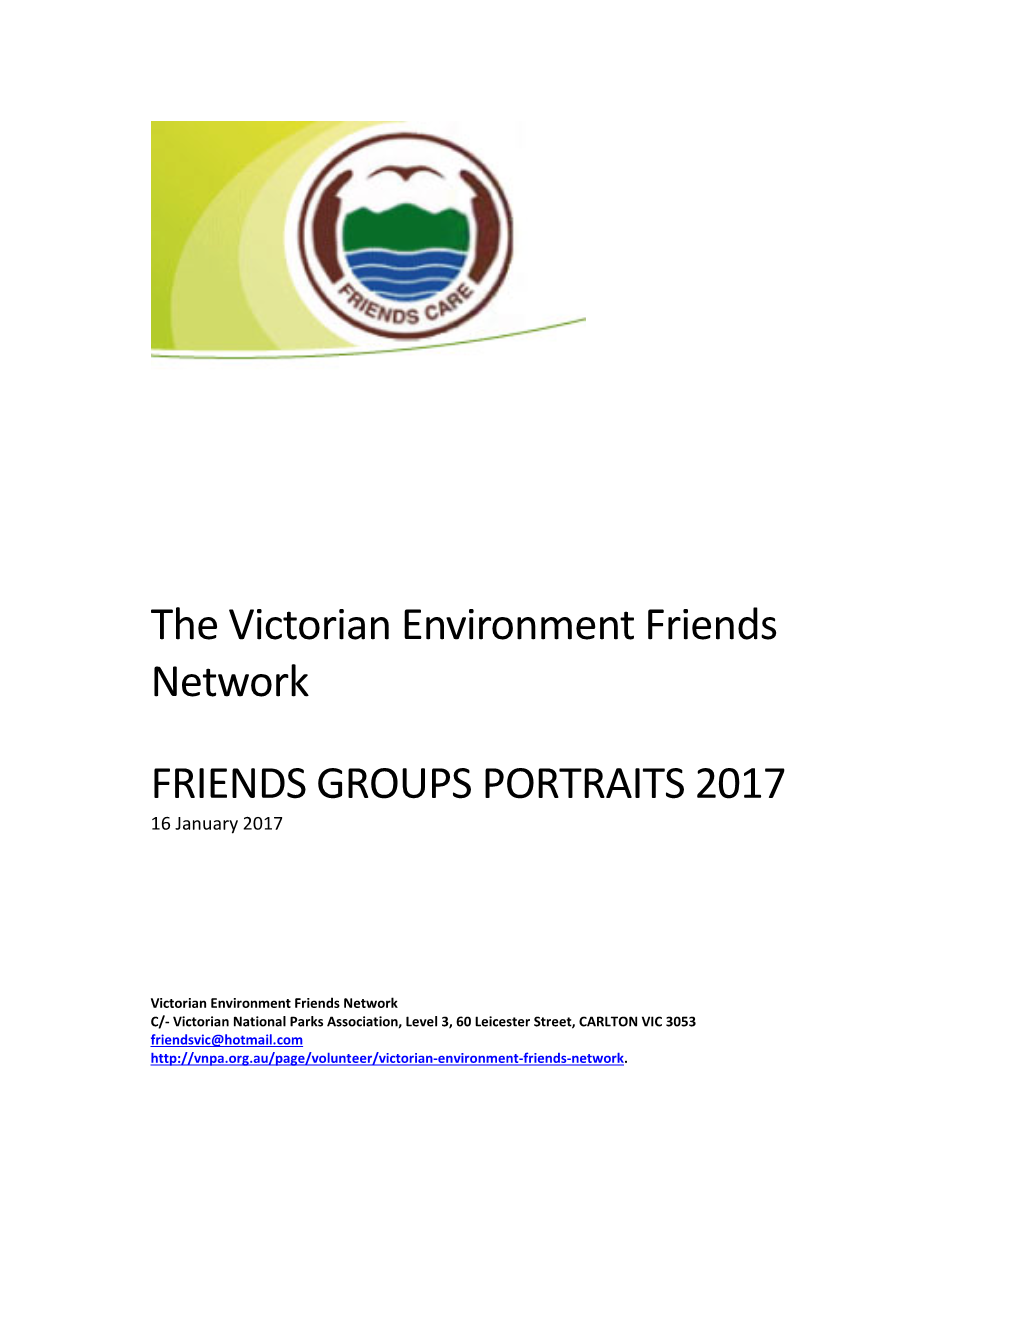 The Victorian Environment Friends Network FRIENDS GROUPS